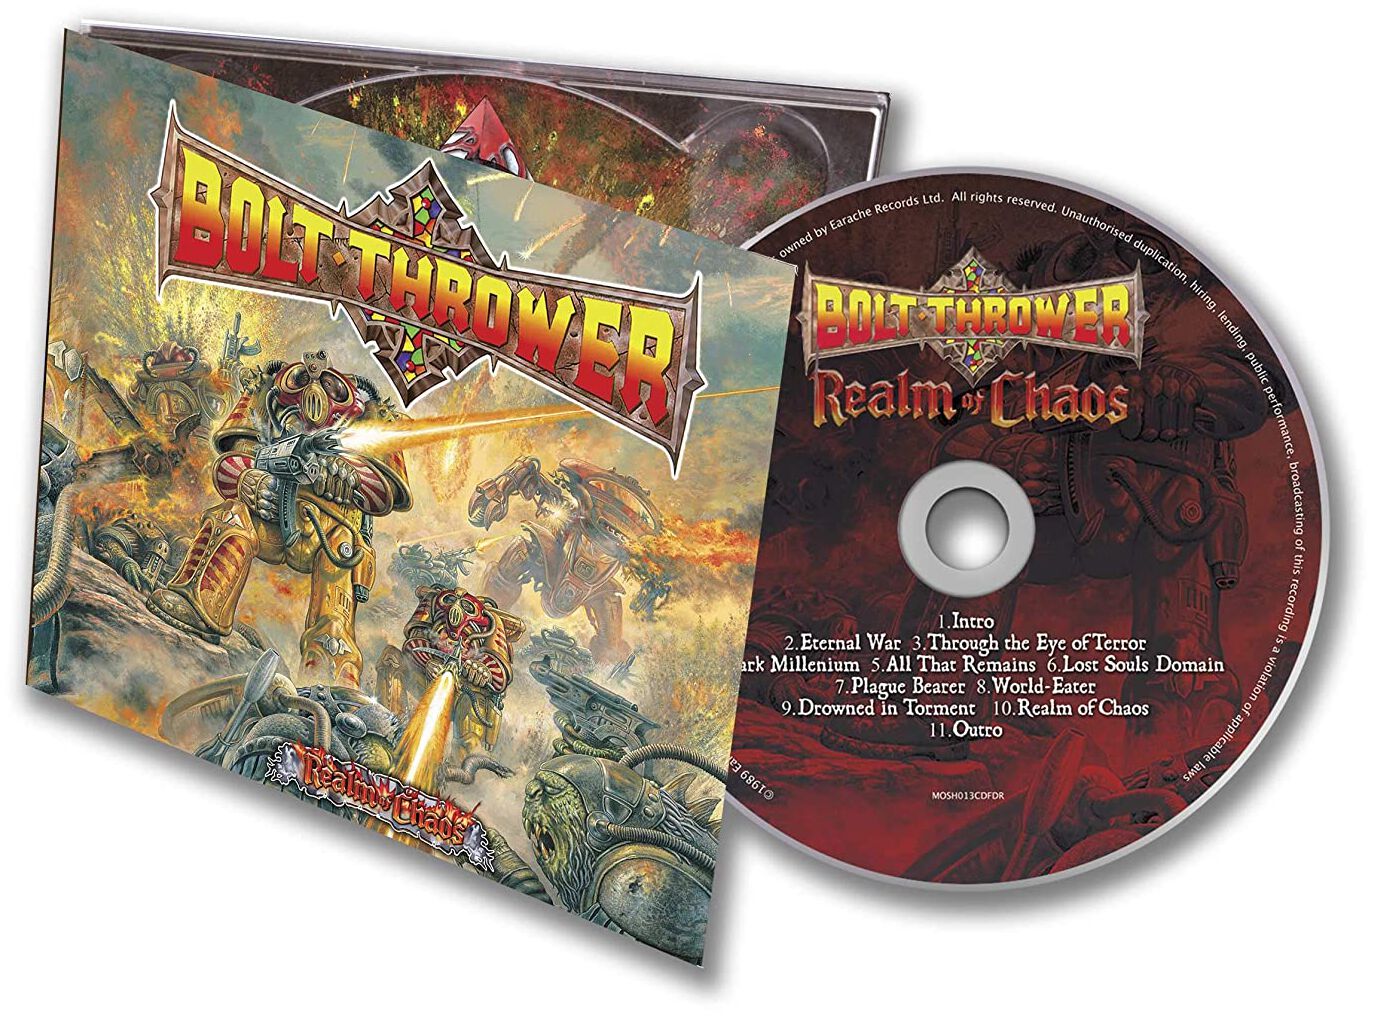 Image of Bolt Thrower Realm of chaos CD Standard